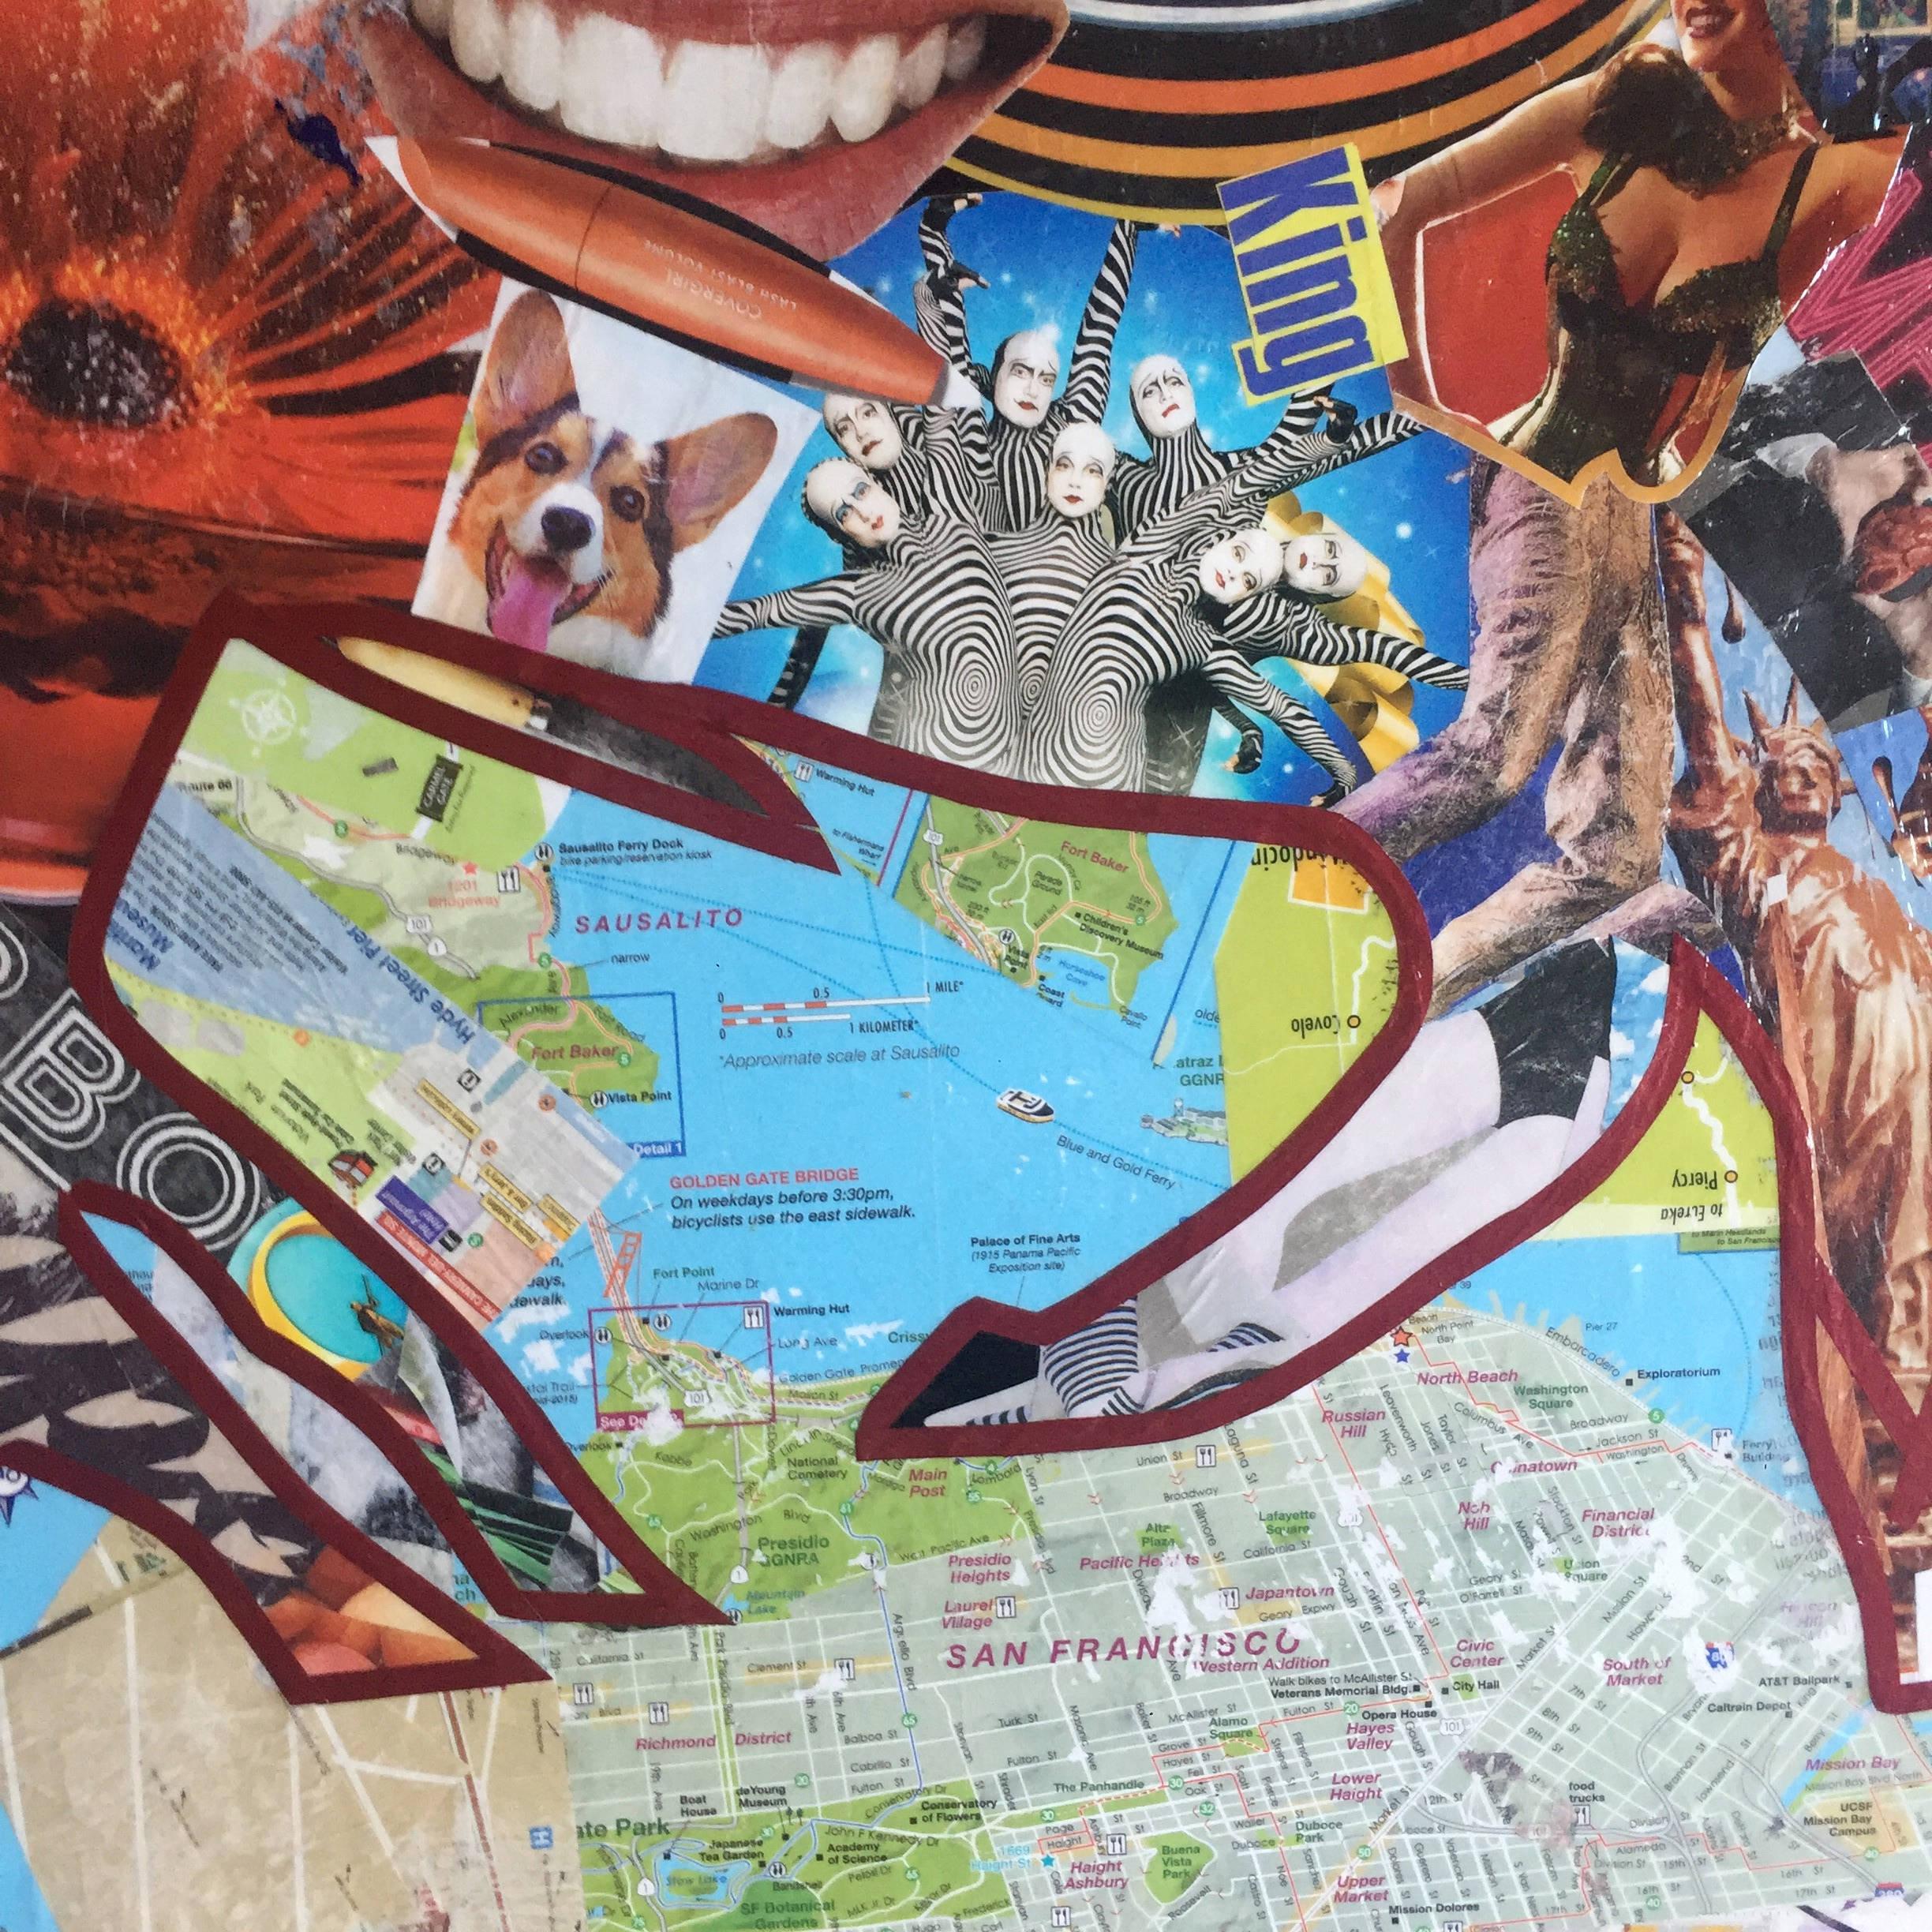 **LIMITED TIME SUPER SALE - TAKE ADVANTAGE OF IT**

World Tour collage by Mauro Oliveira, signed: Magazine pages and maps collage on wood canvas covered with glossy varnish.

Calling all fellow taurus out there to appreciate this one of kind Bull